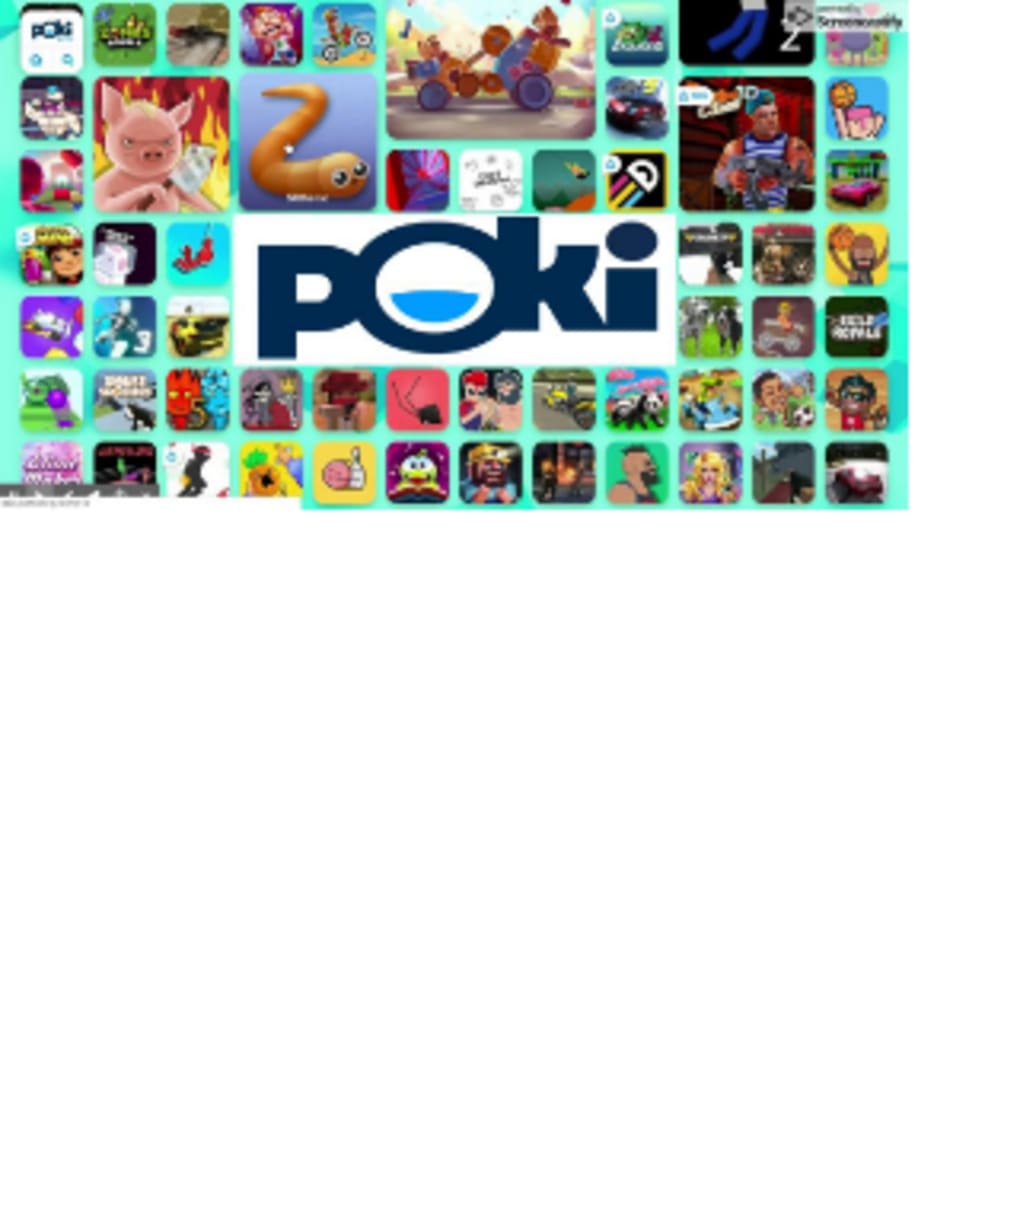 Download poki games android on PC